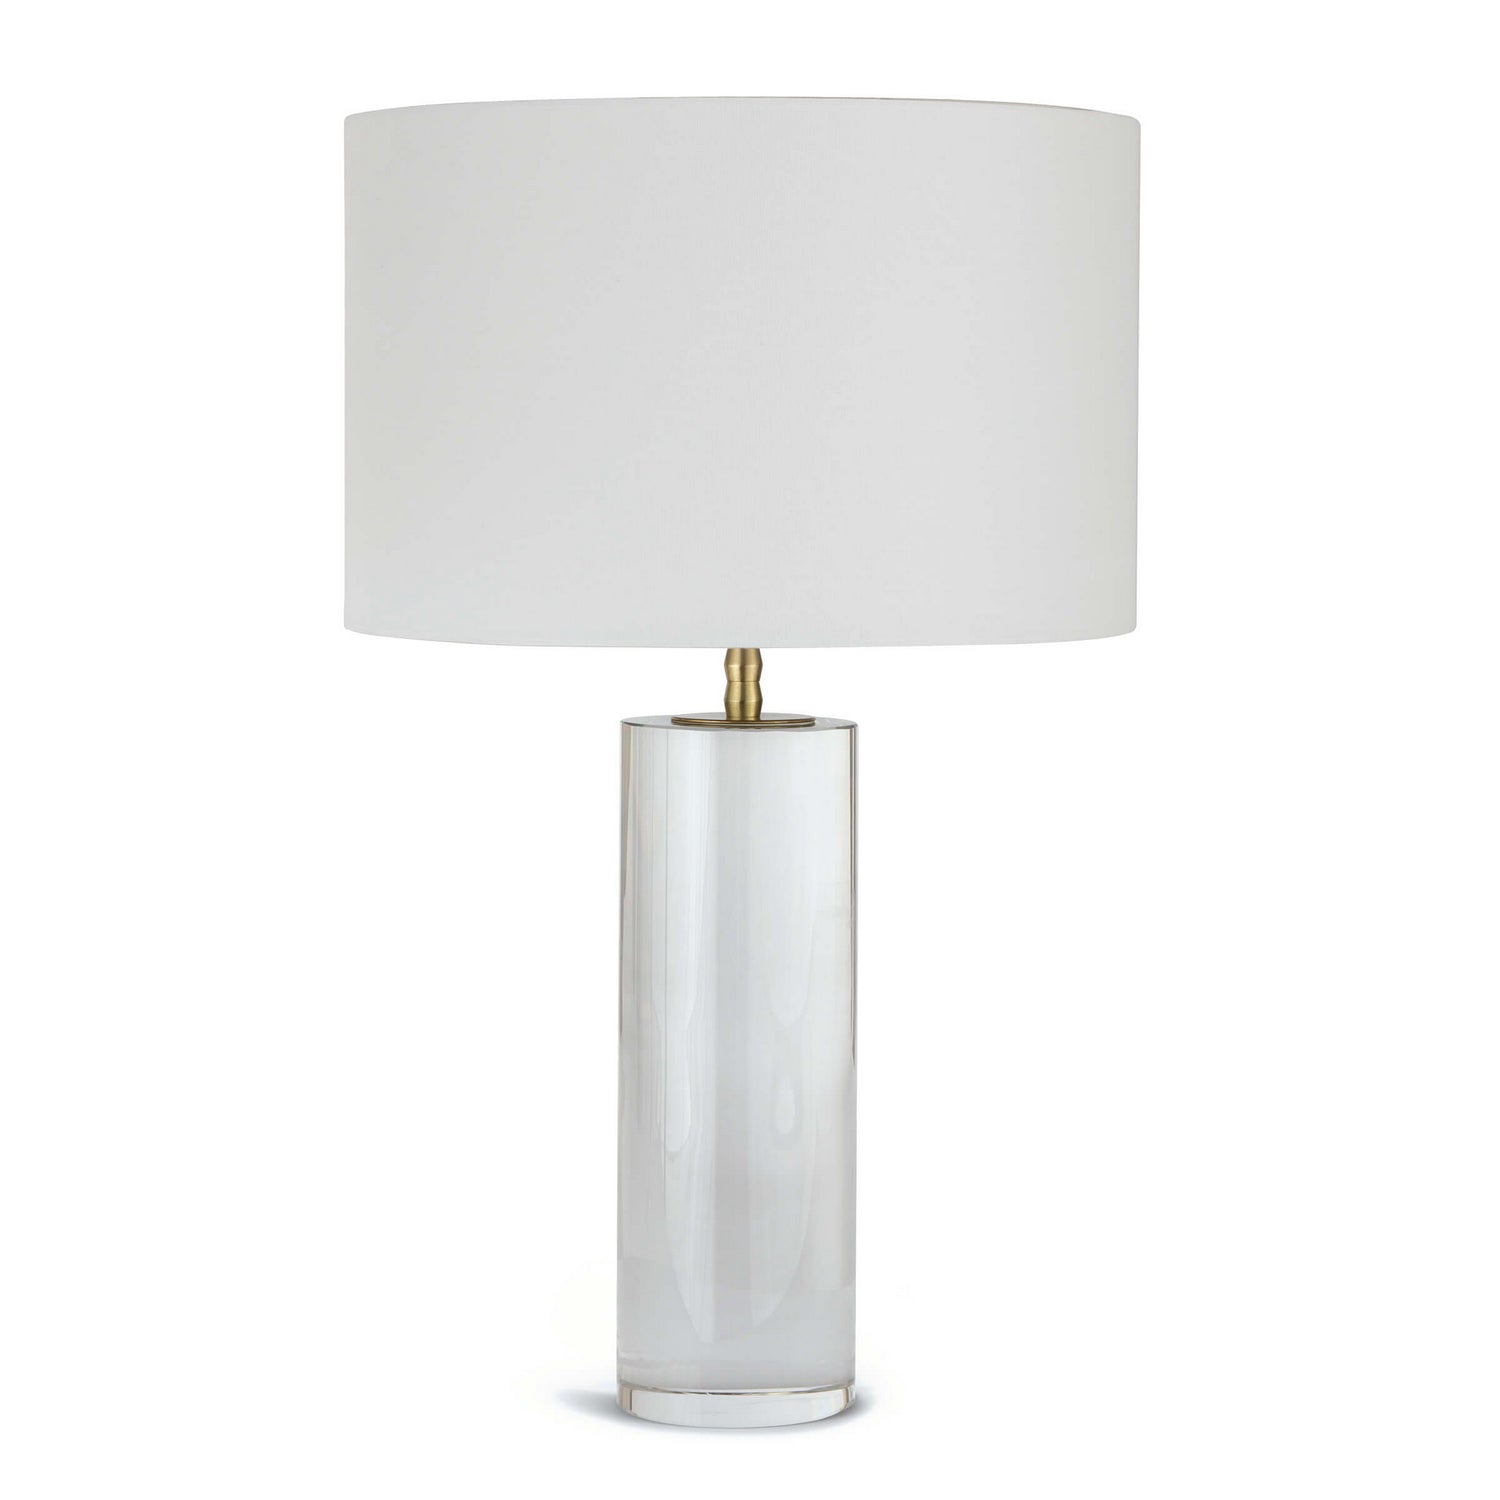 Regina Andrew - 13-1283 - One Light Table Lamp - Juliet - Clear